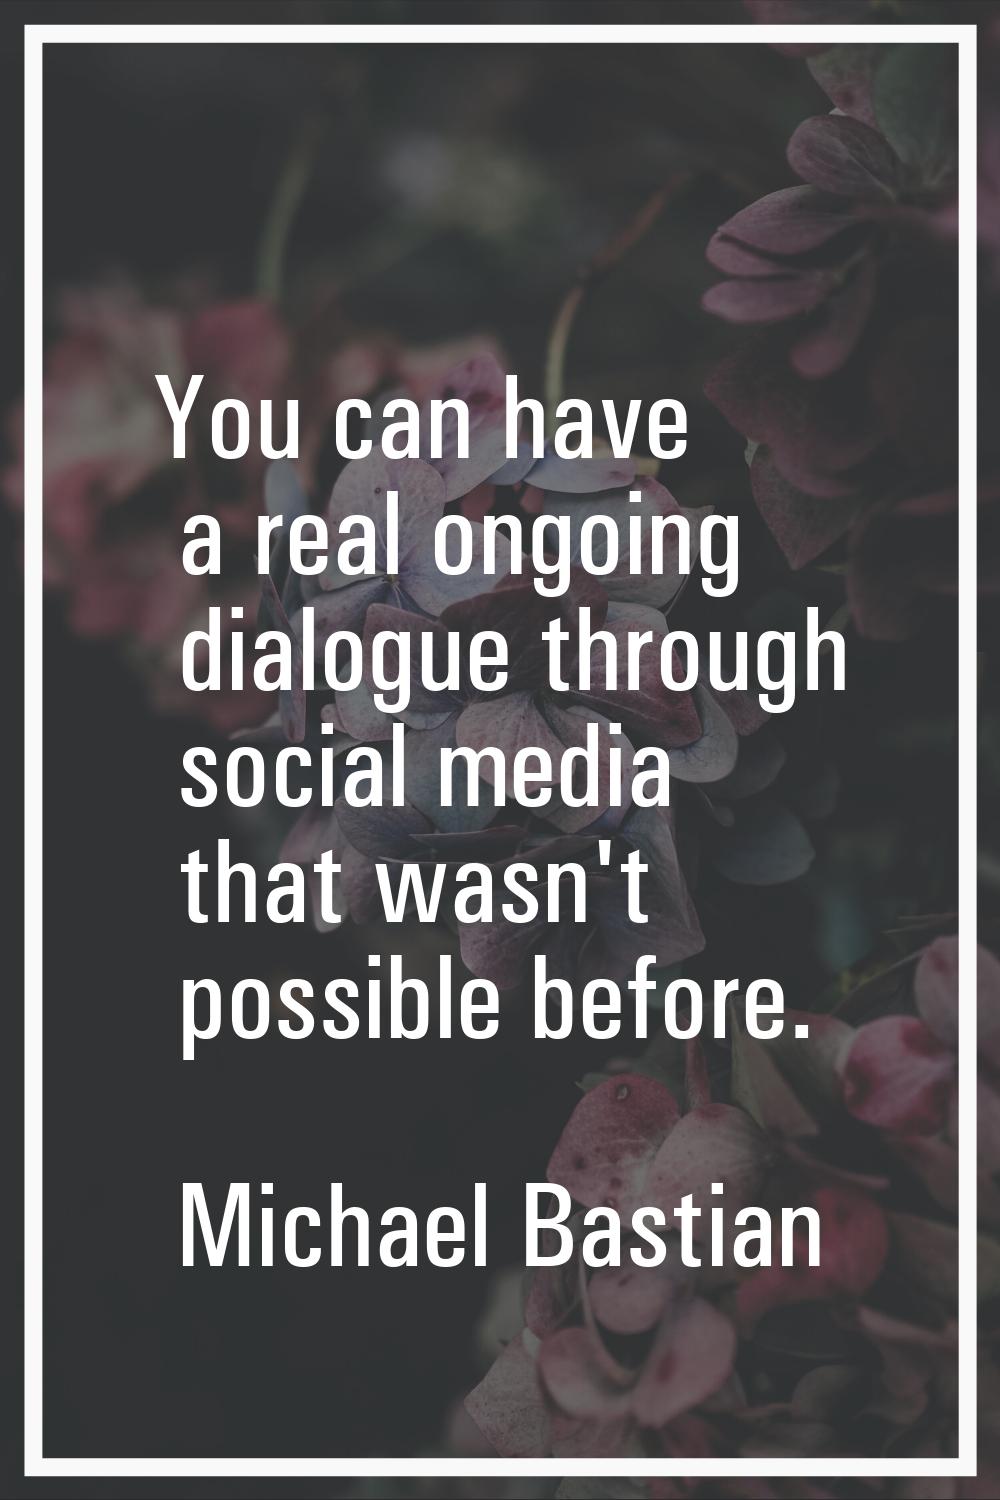 You can have a real ongoing dialogue through social media that wasn't possible before.